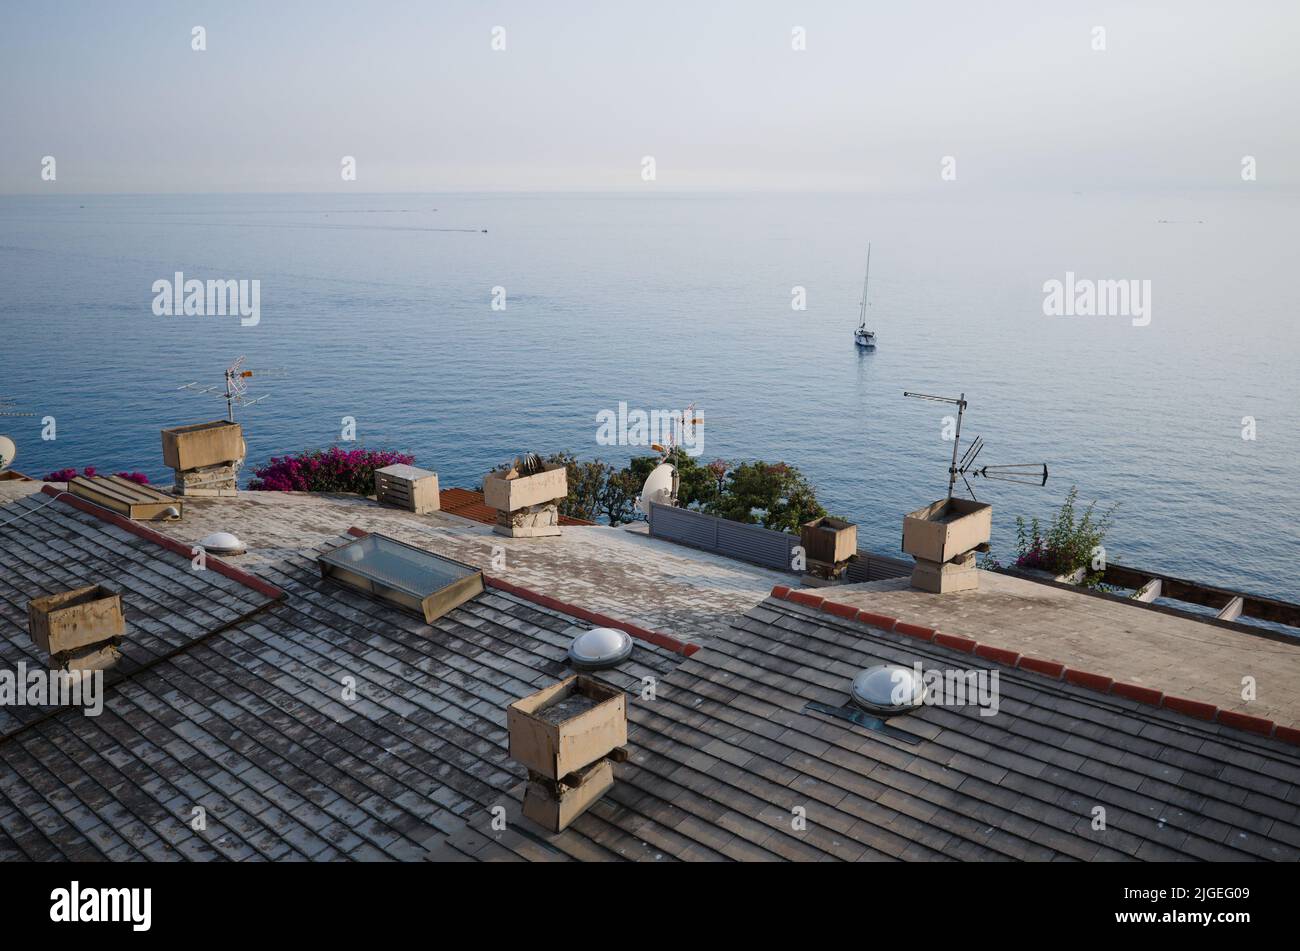 Tiled roofs of Italian houses on Mediterranean coast. Panorama of  Ligurian Sea from roof of house. Landscape with calm water and yacht Stock Photo